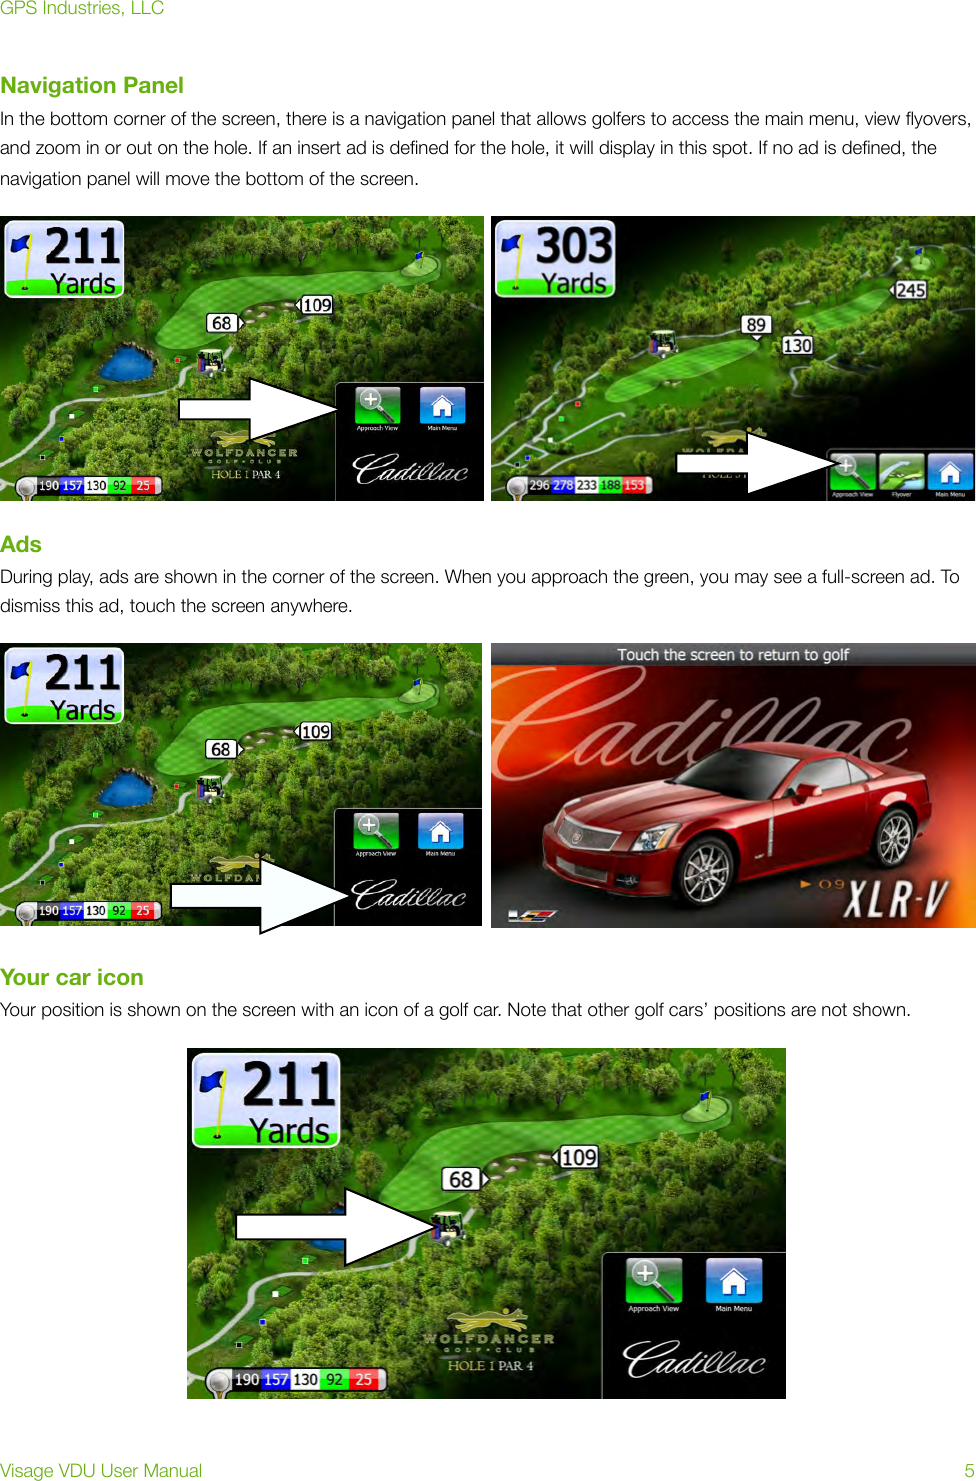 Navigation PanelIn the bottom corner of the screen, there is a navigation panel that allows golfers to access the main menu, view ﬂyovers, and zoom in or out on the hole. If an insert ad is deﬁned for the hole, it will display in this spot. If no ad is deﬁned, the navigation panel will move the bottom of the screen.AdsDuring play, ads are shown in the corner of the screen. When you approach the green, you may see a full-screen ad. To dismiss this ad, touch the screen anywhere.  Your car iconYour position is shown on the screen with an icon of a golf car. Note that other golf cars’ positions are not shown.GPS Industries, LLCVisage VDU User Manual!5